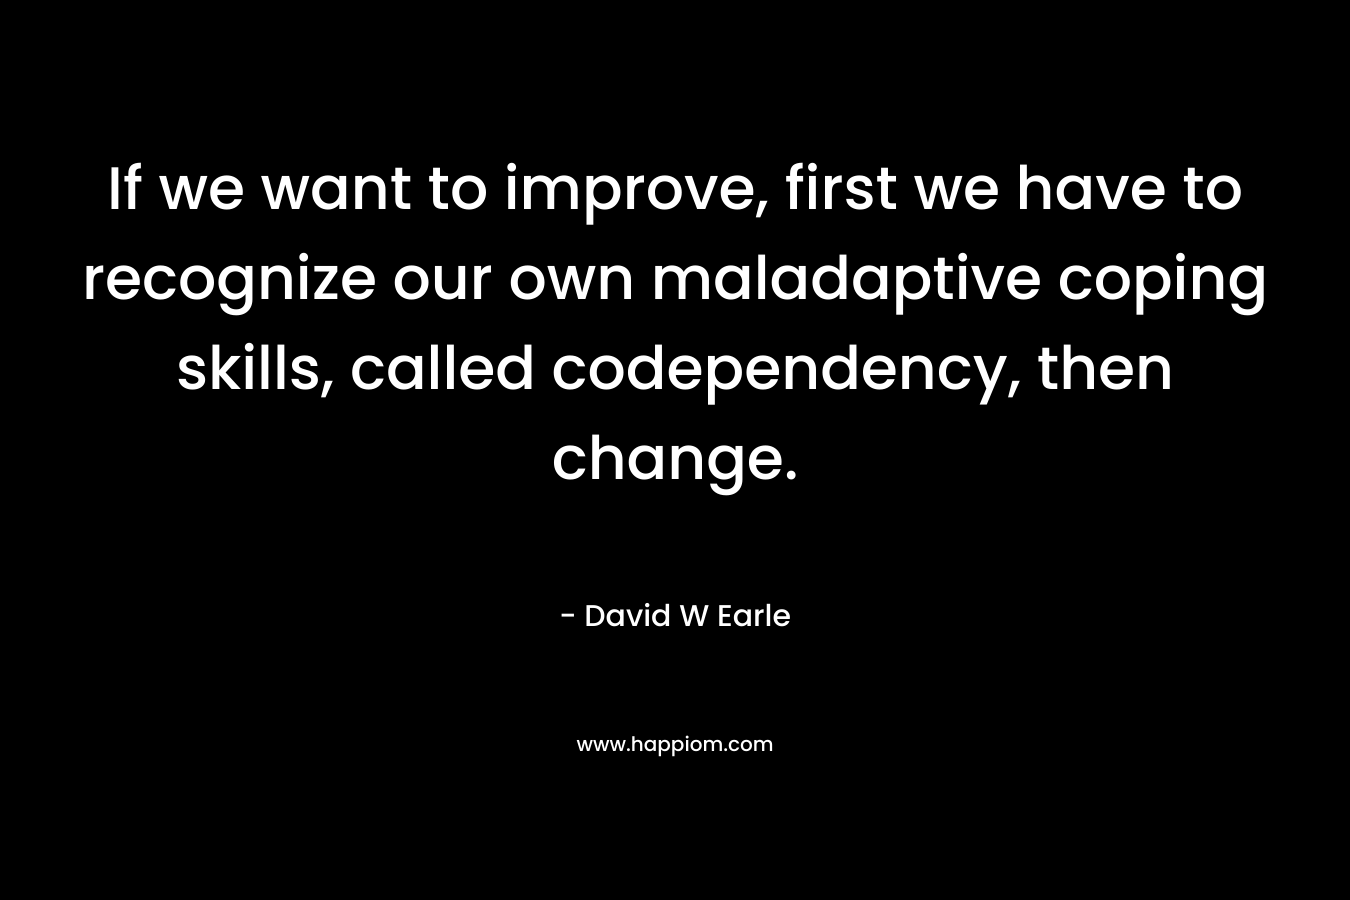 If we want to improve, first we have to recognize our own maladaptive coping skills, called codependency, then change. – David W Earle